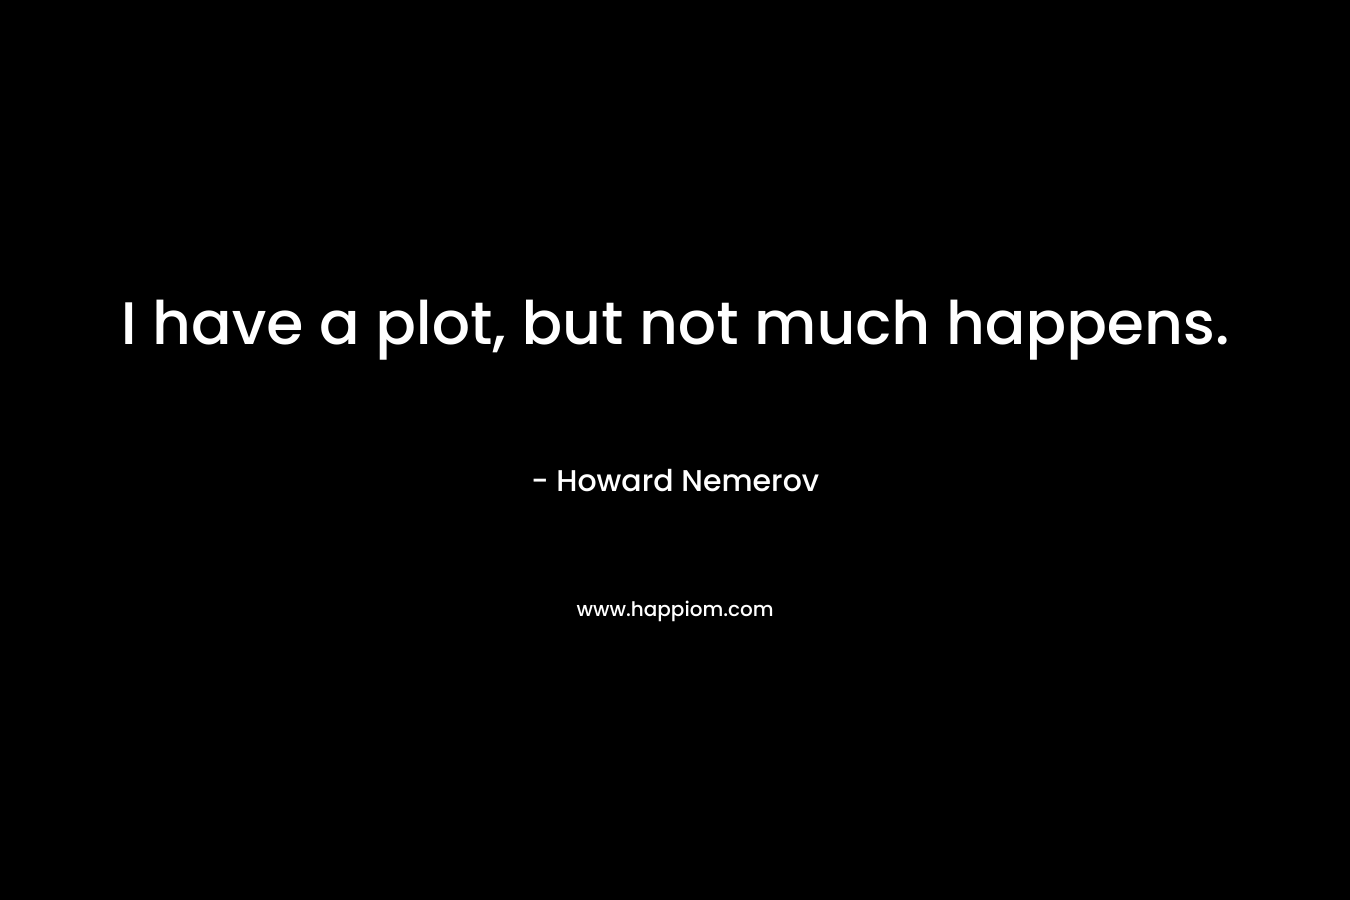 I have a plot, but not much happens.